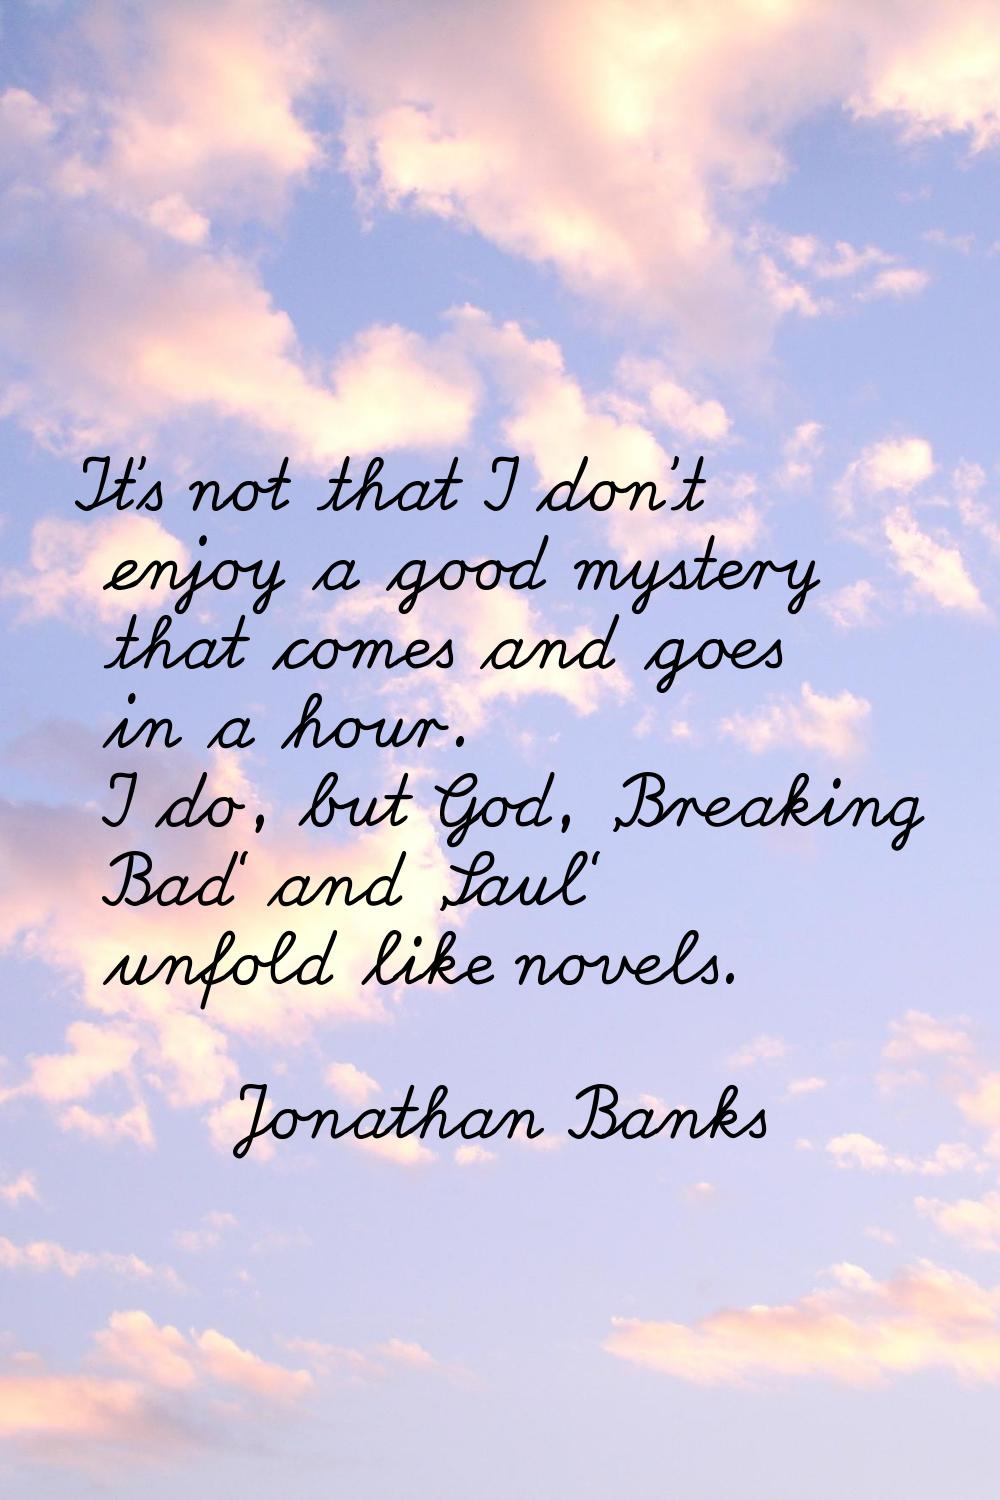 It's not that I don't enjoy a good mystery that comes and goes in a hour. I do, but God, 'Breaking 